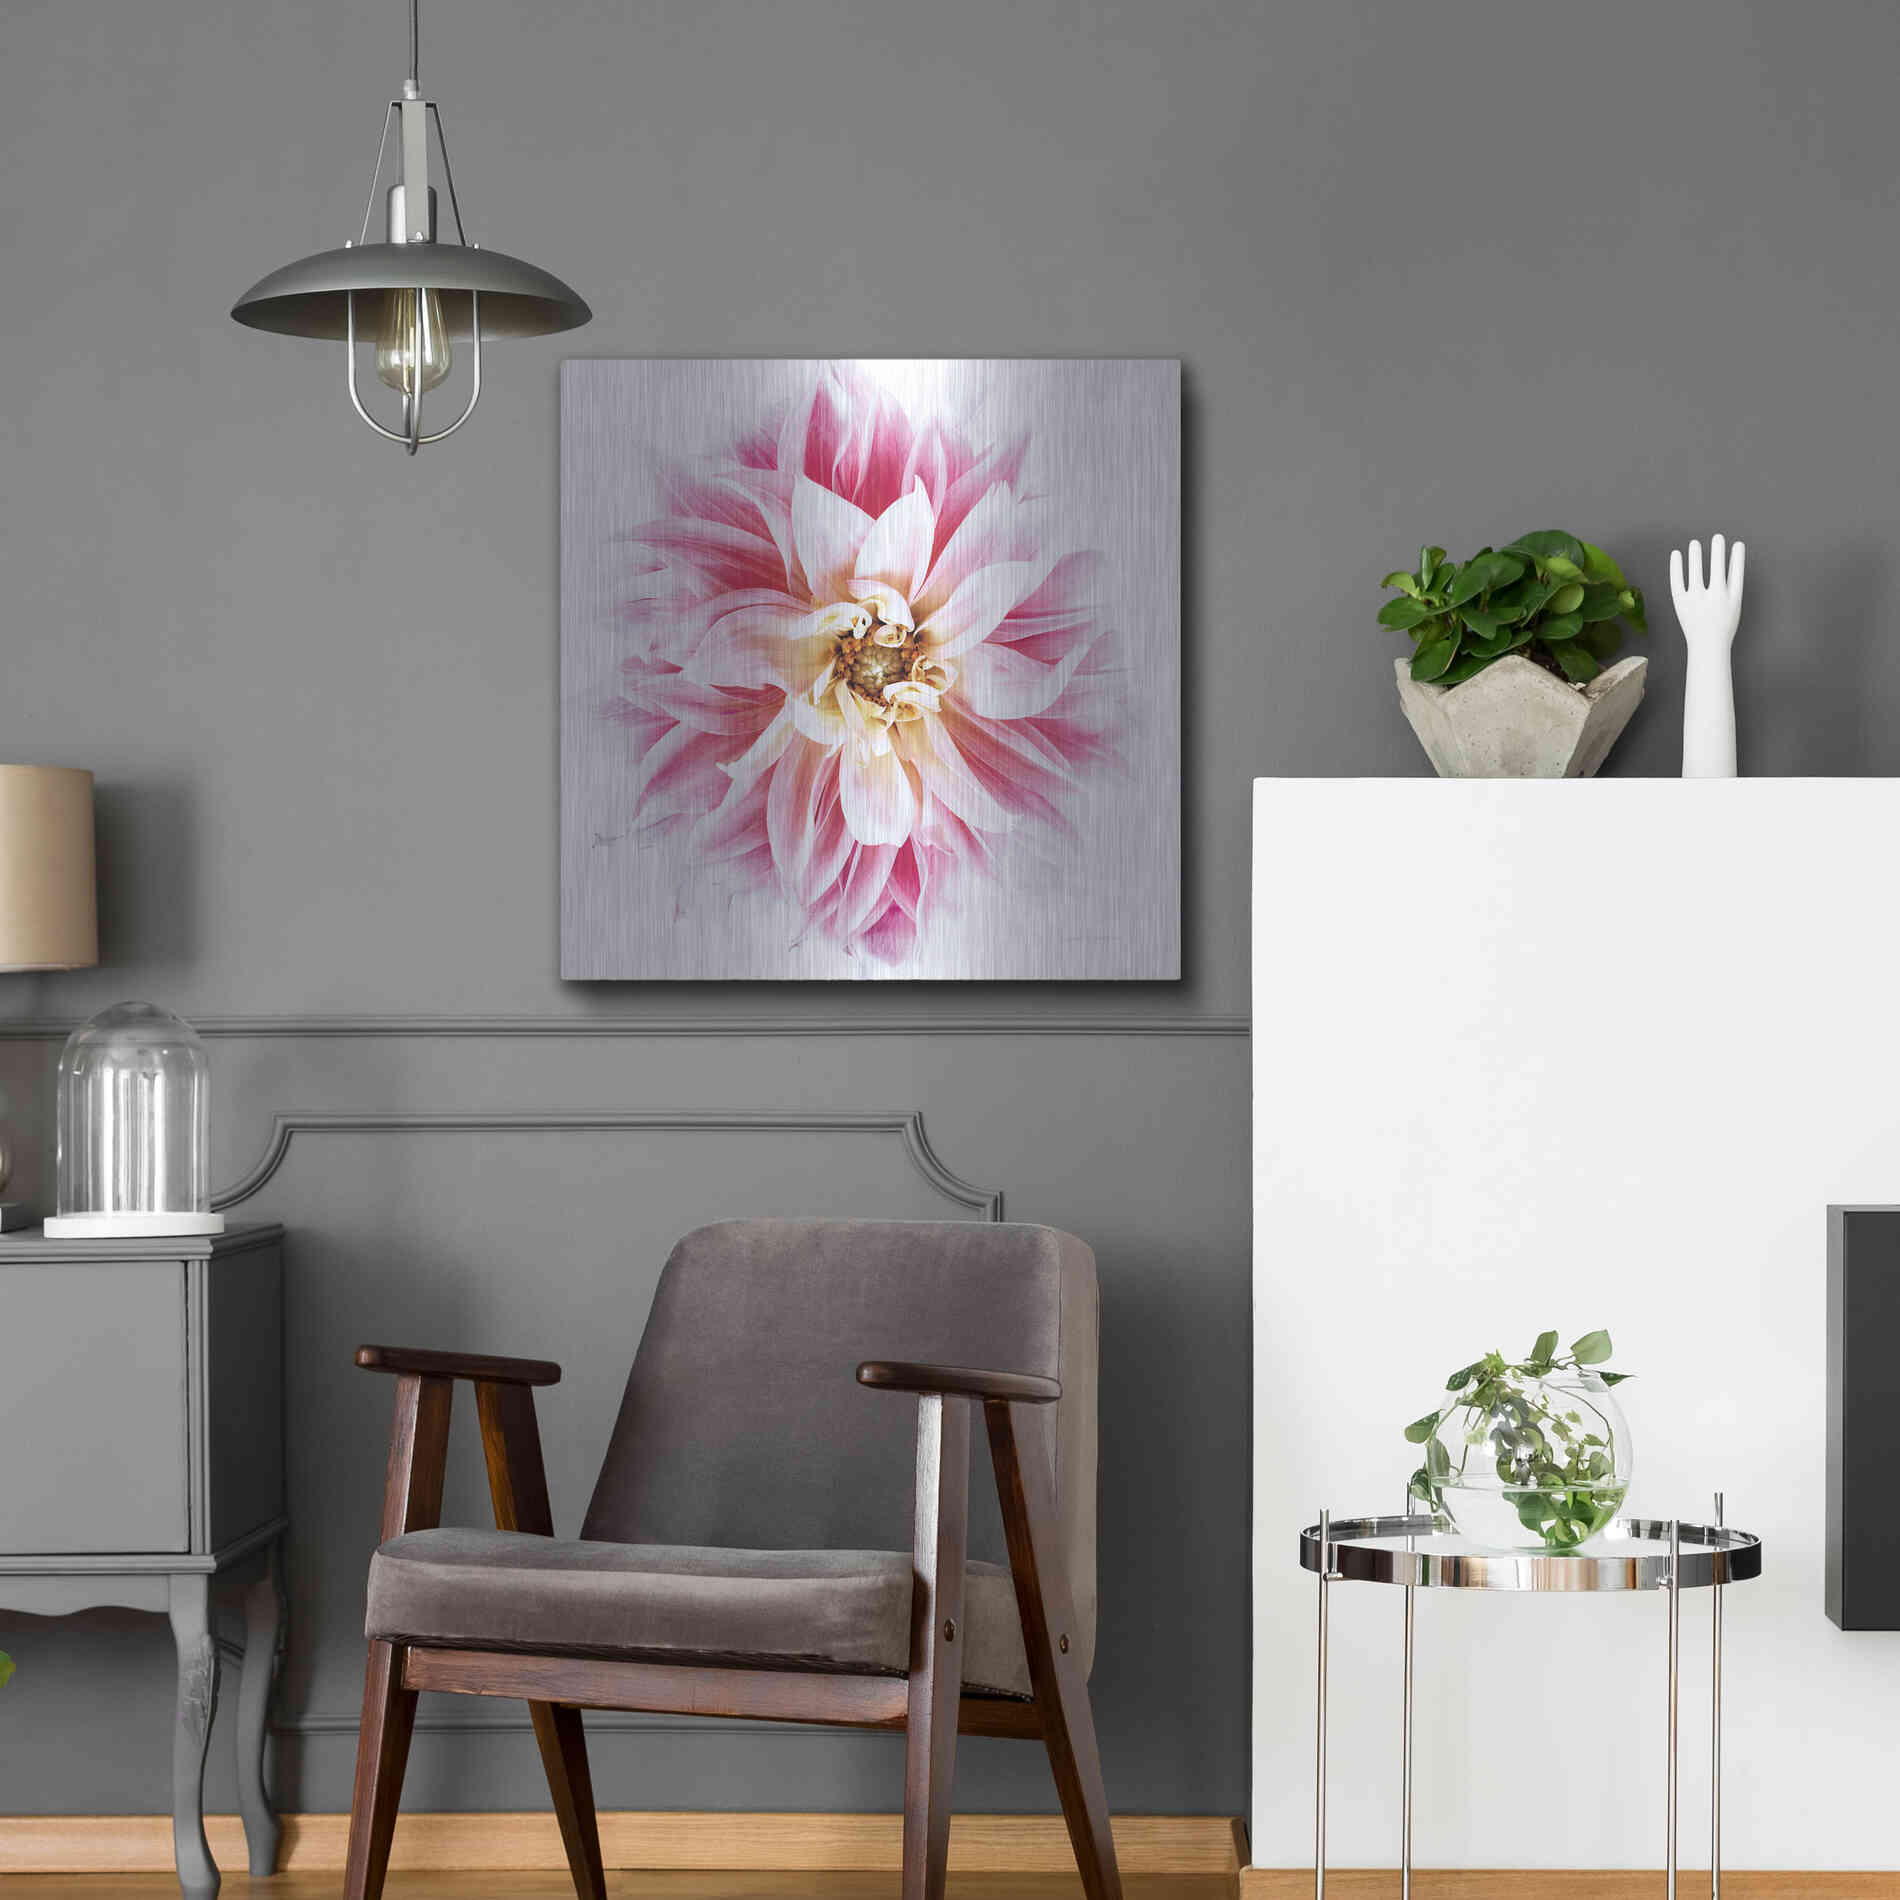 Luxe Metal Art 'Pink Dahlia' by Elise Catterall, Metal Wall Art,24x24